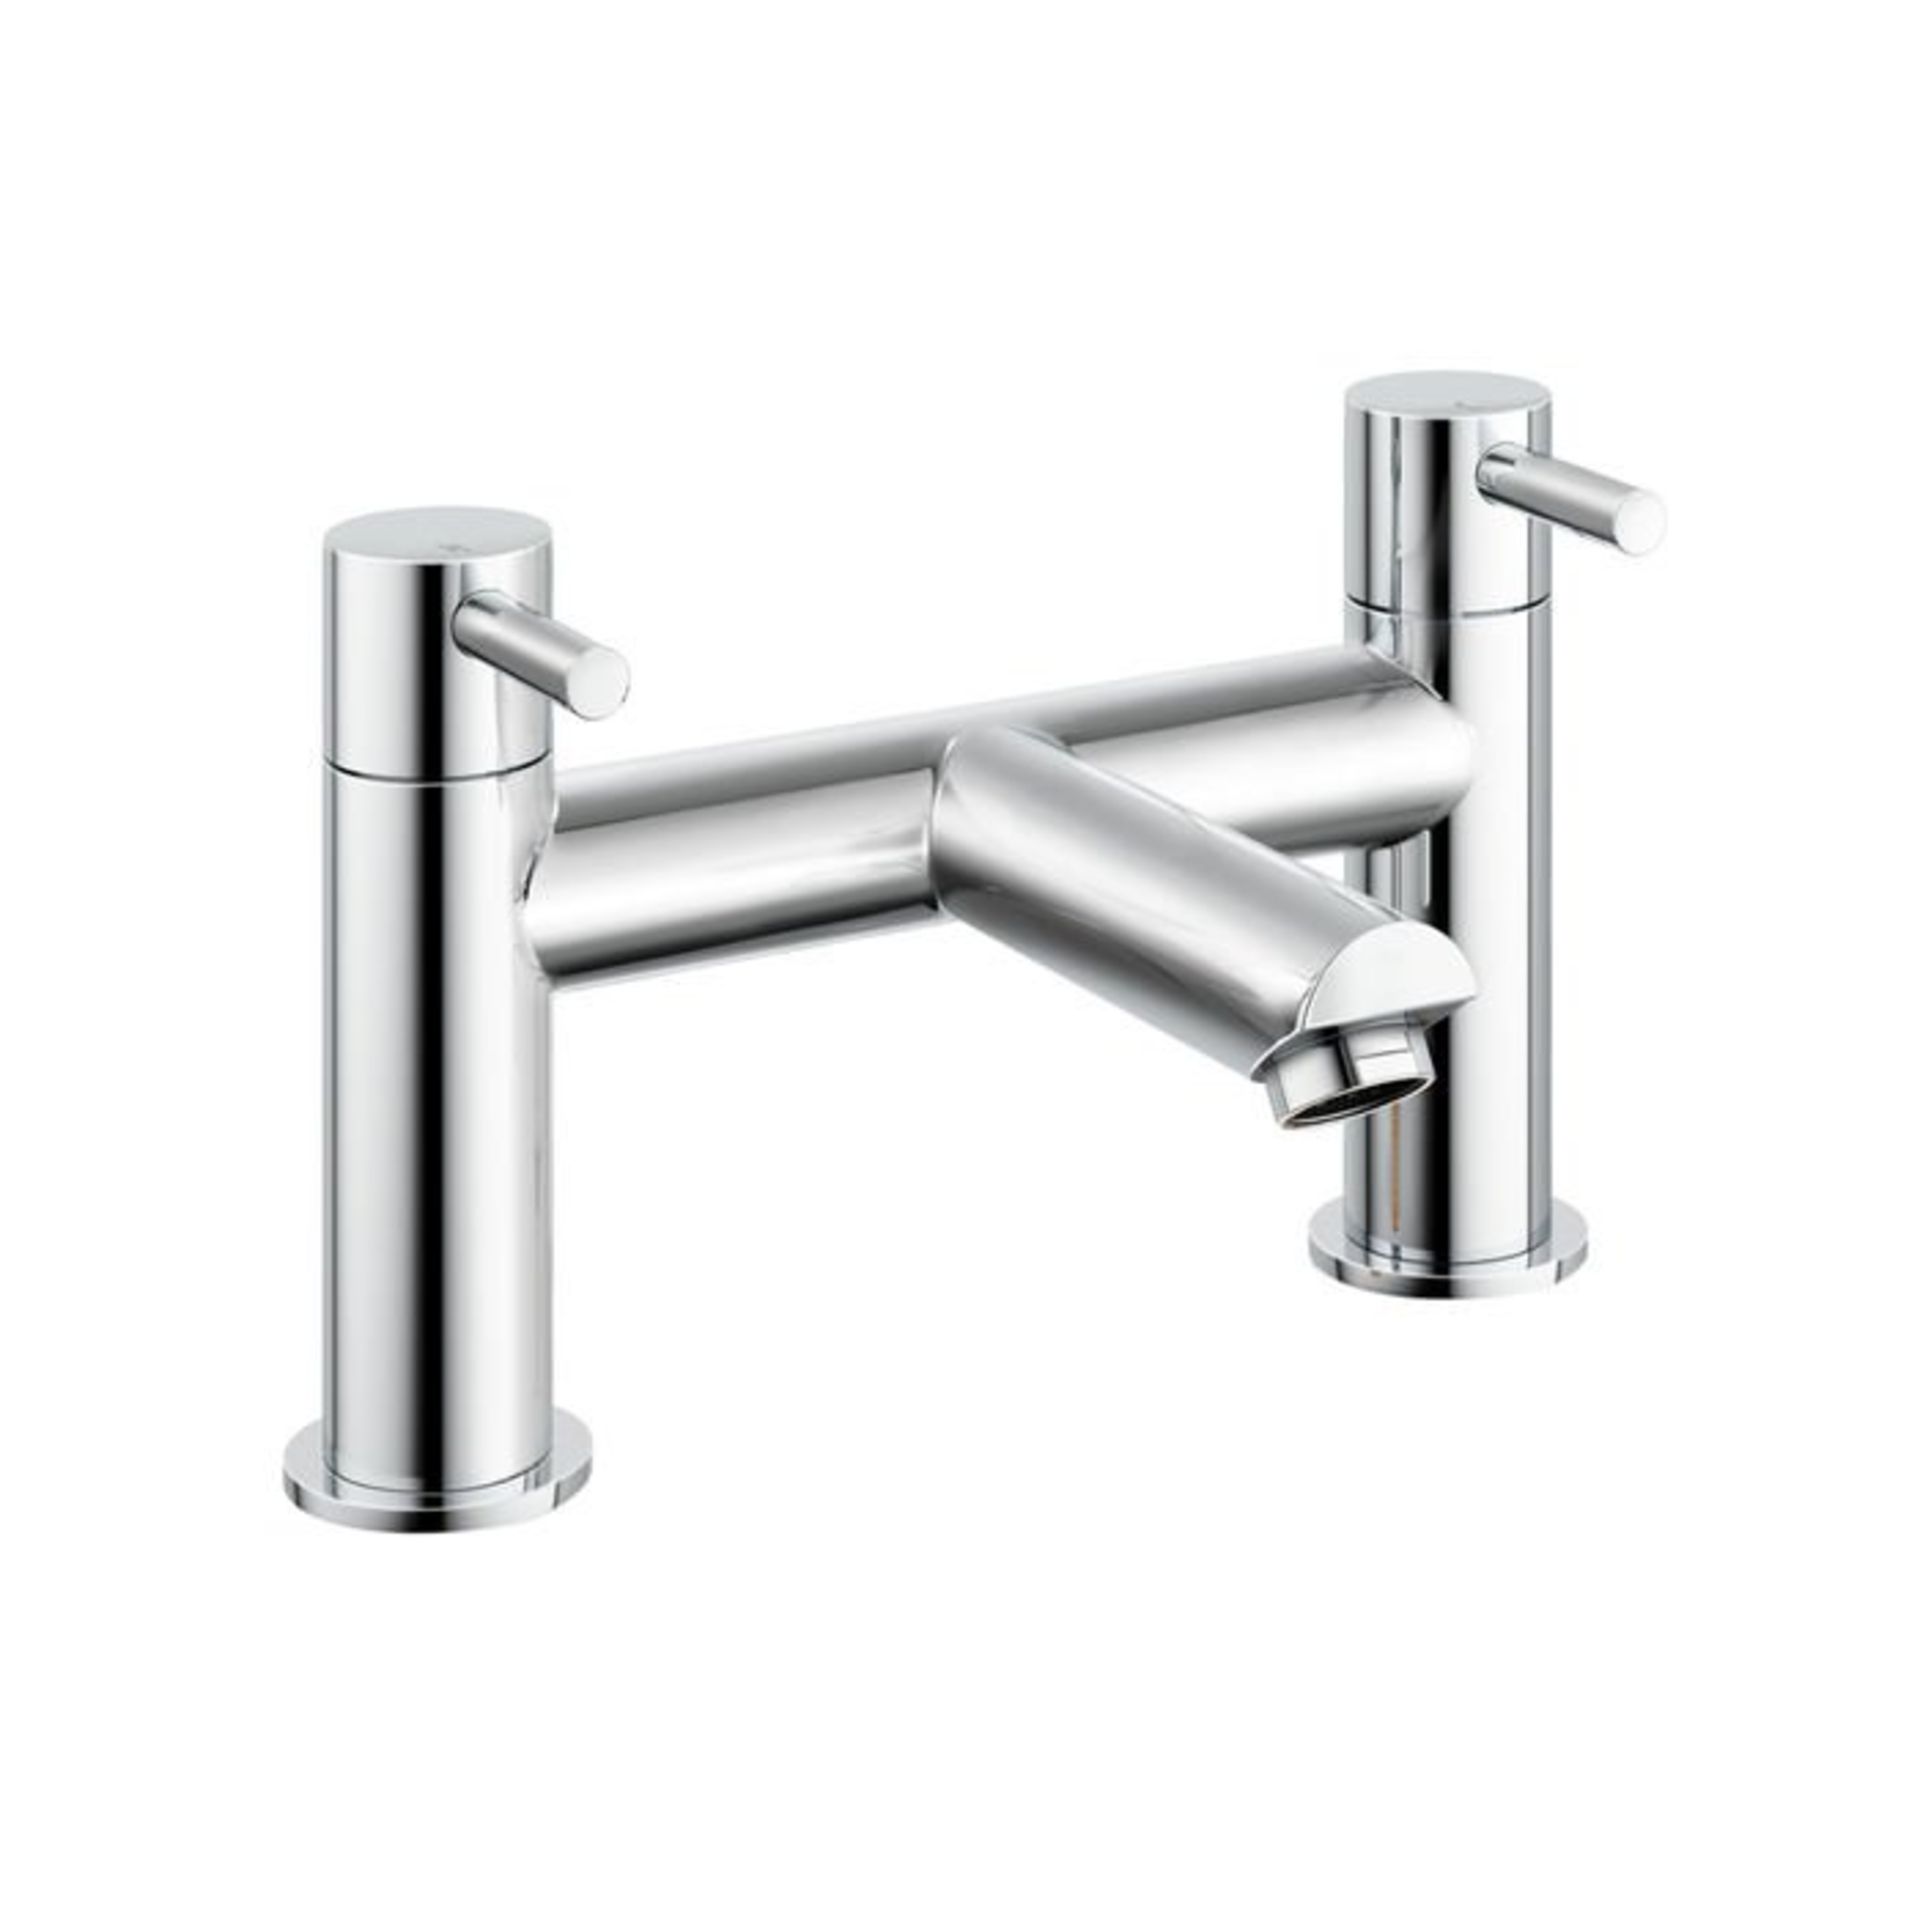 (S150) Gladstone II Bath Filler Mixer Tap Chrome Plated Solid Brass 1/4 turn solid brass valve - Image 2 of 2